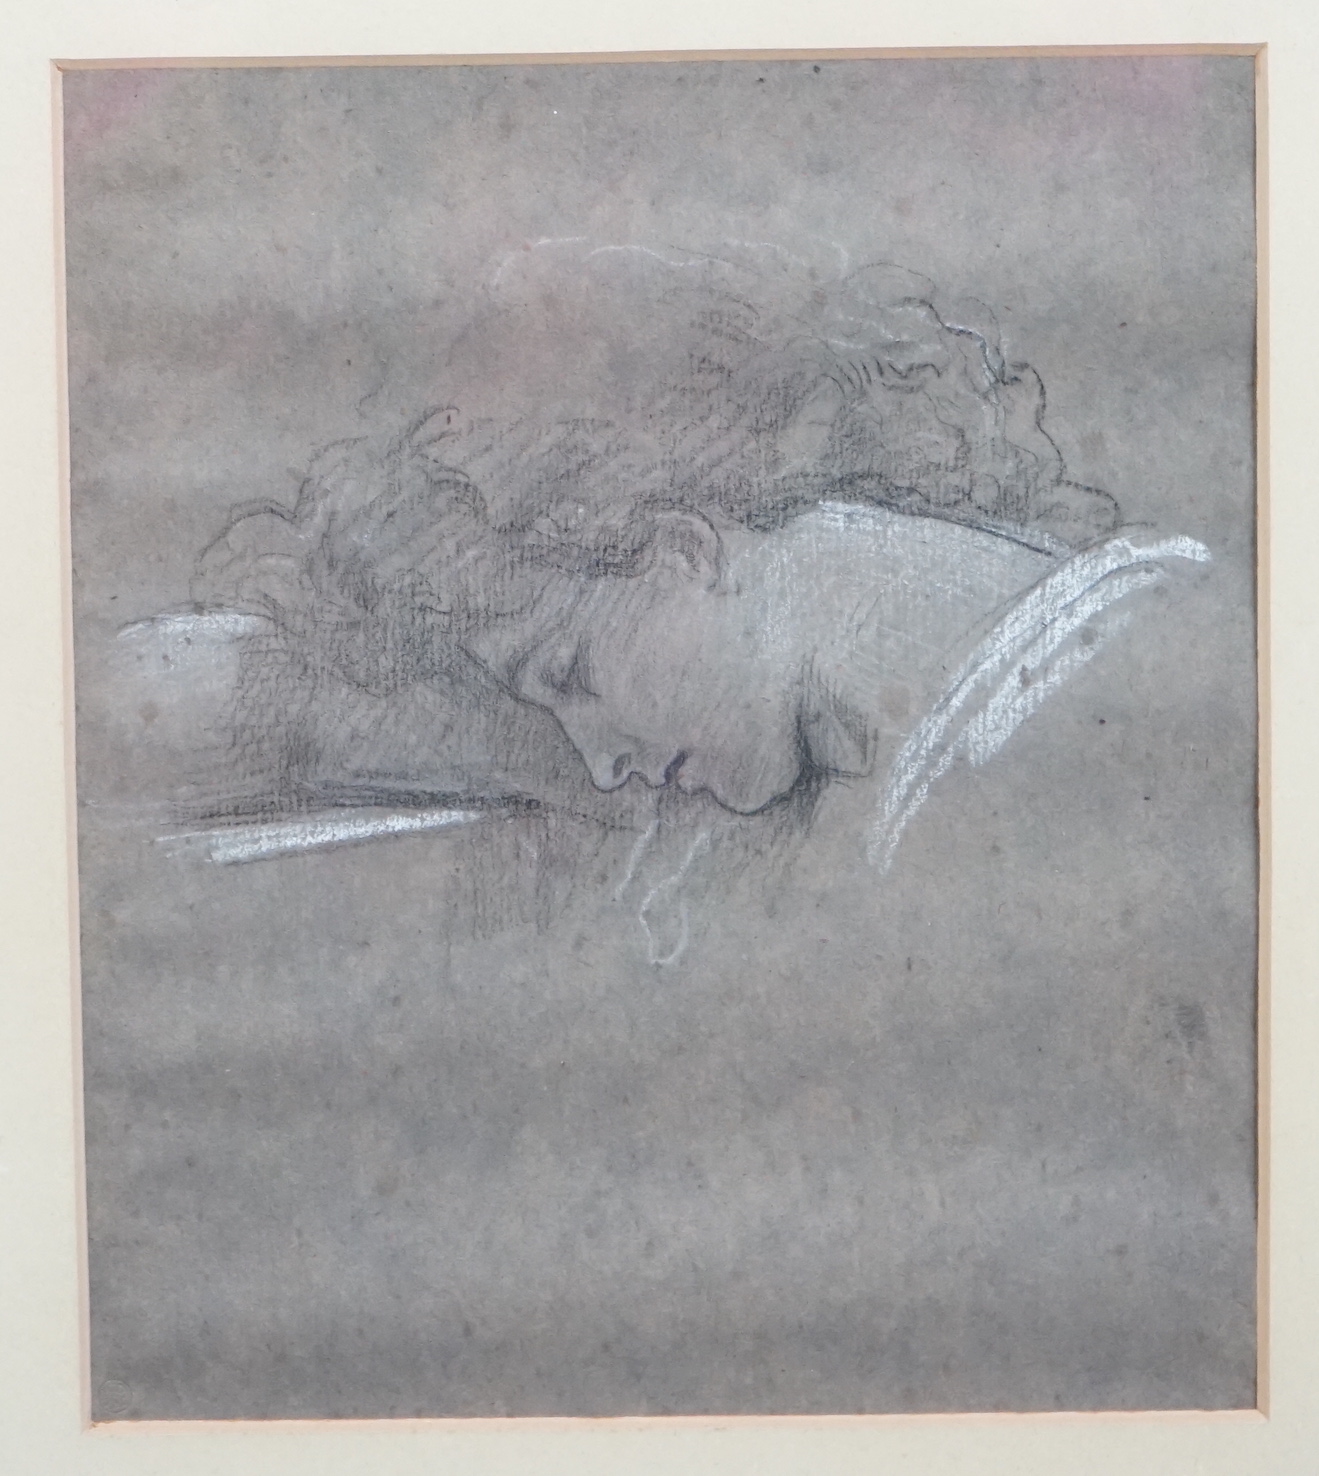 Lord Frederic Leighton PRA (British, 1830-1896), Study for Lachrymae, charcoal and chalk on grey paper, 26.5 x 23cm